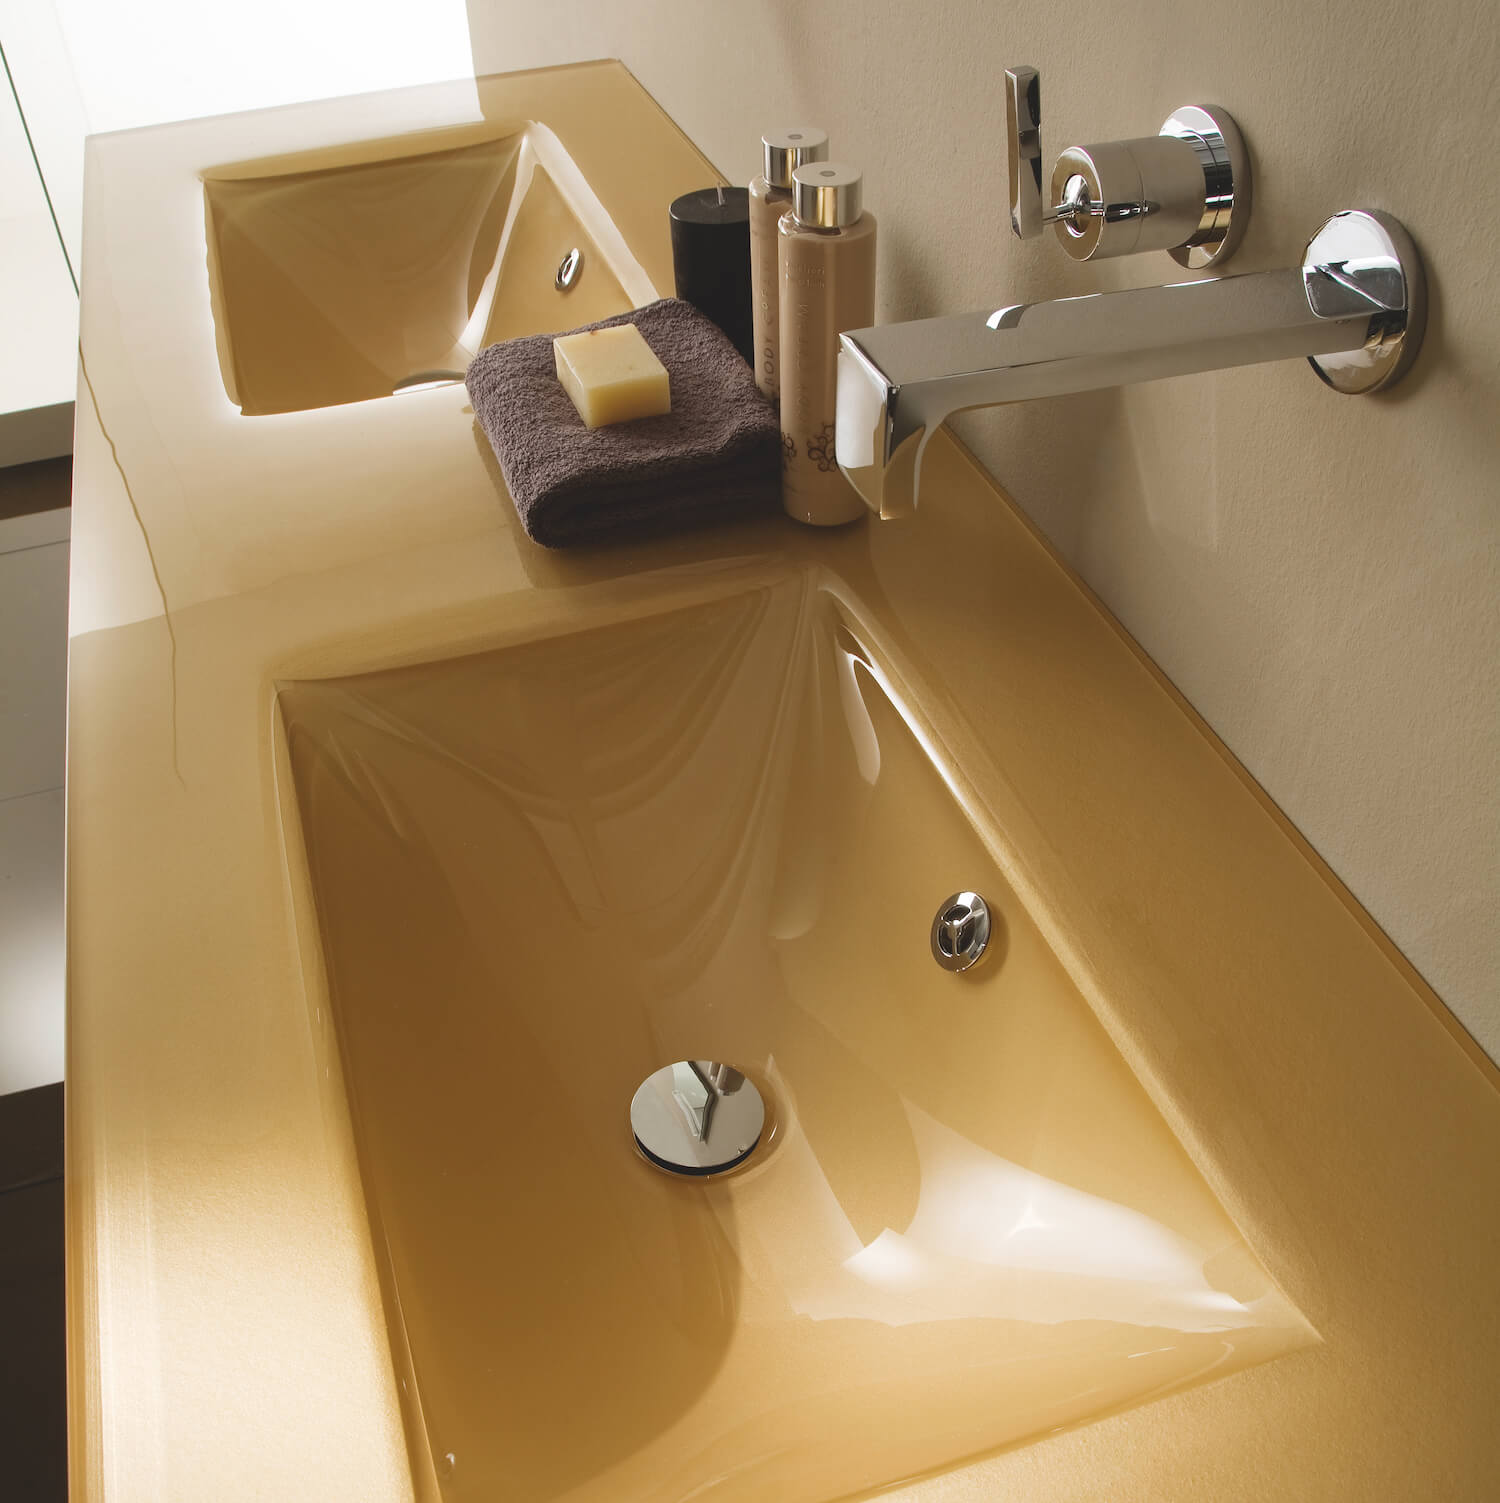 Cristallo luxury bathroom countertop in gold with double basins